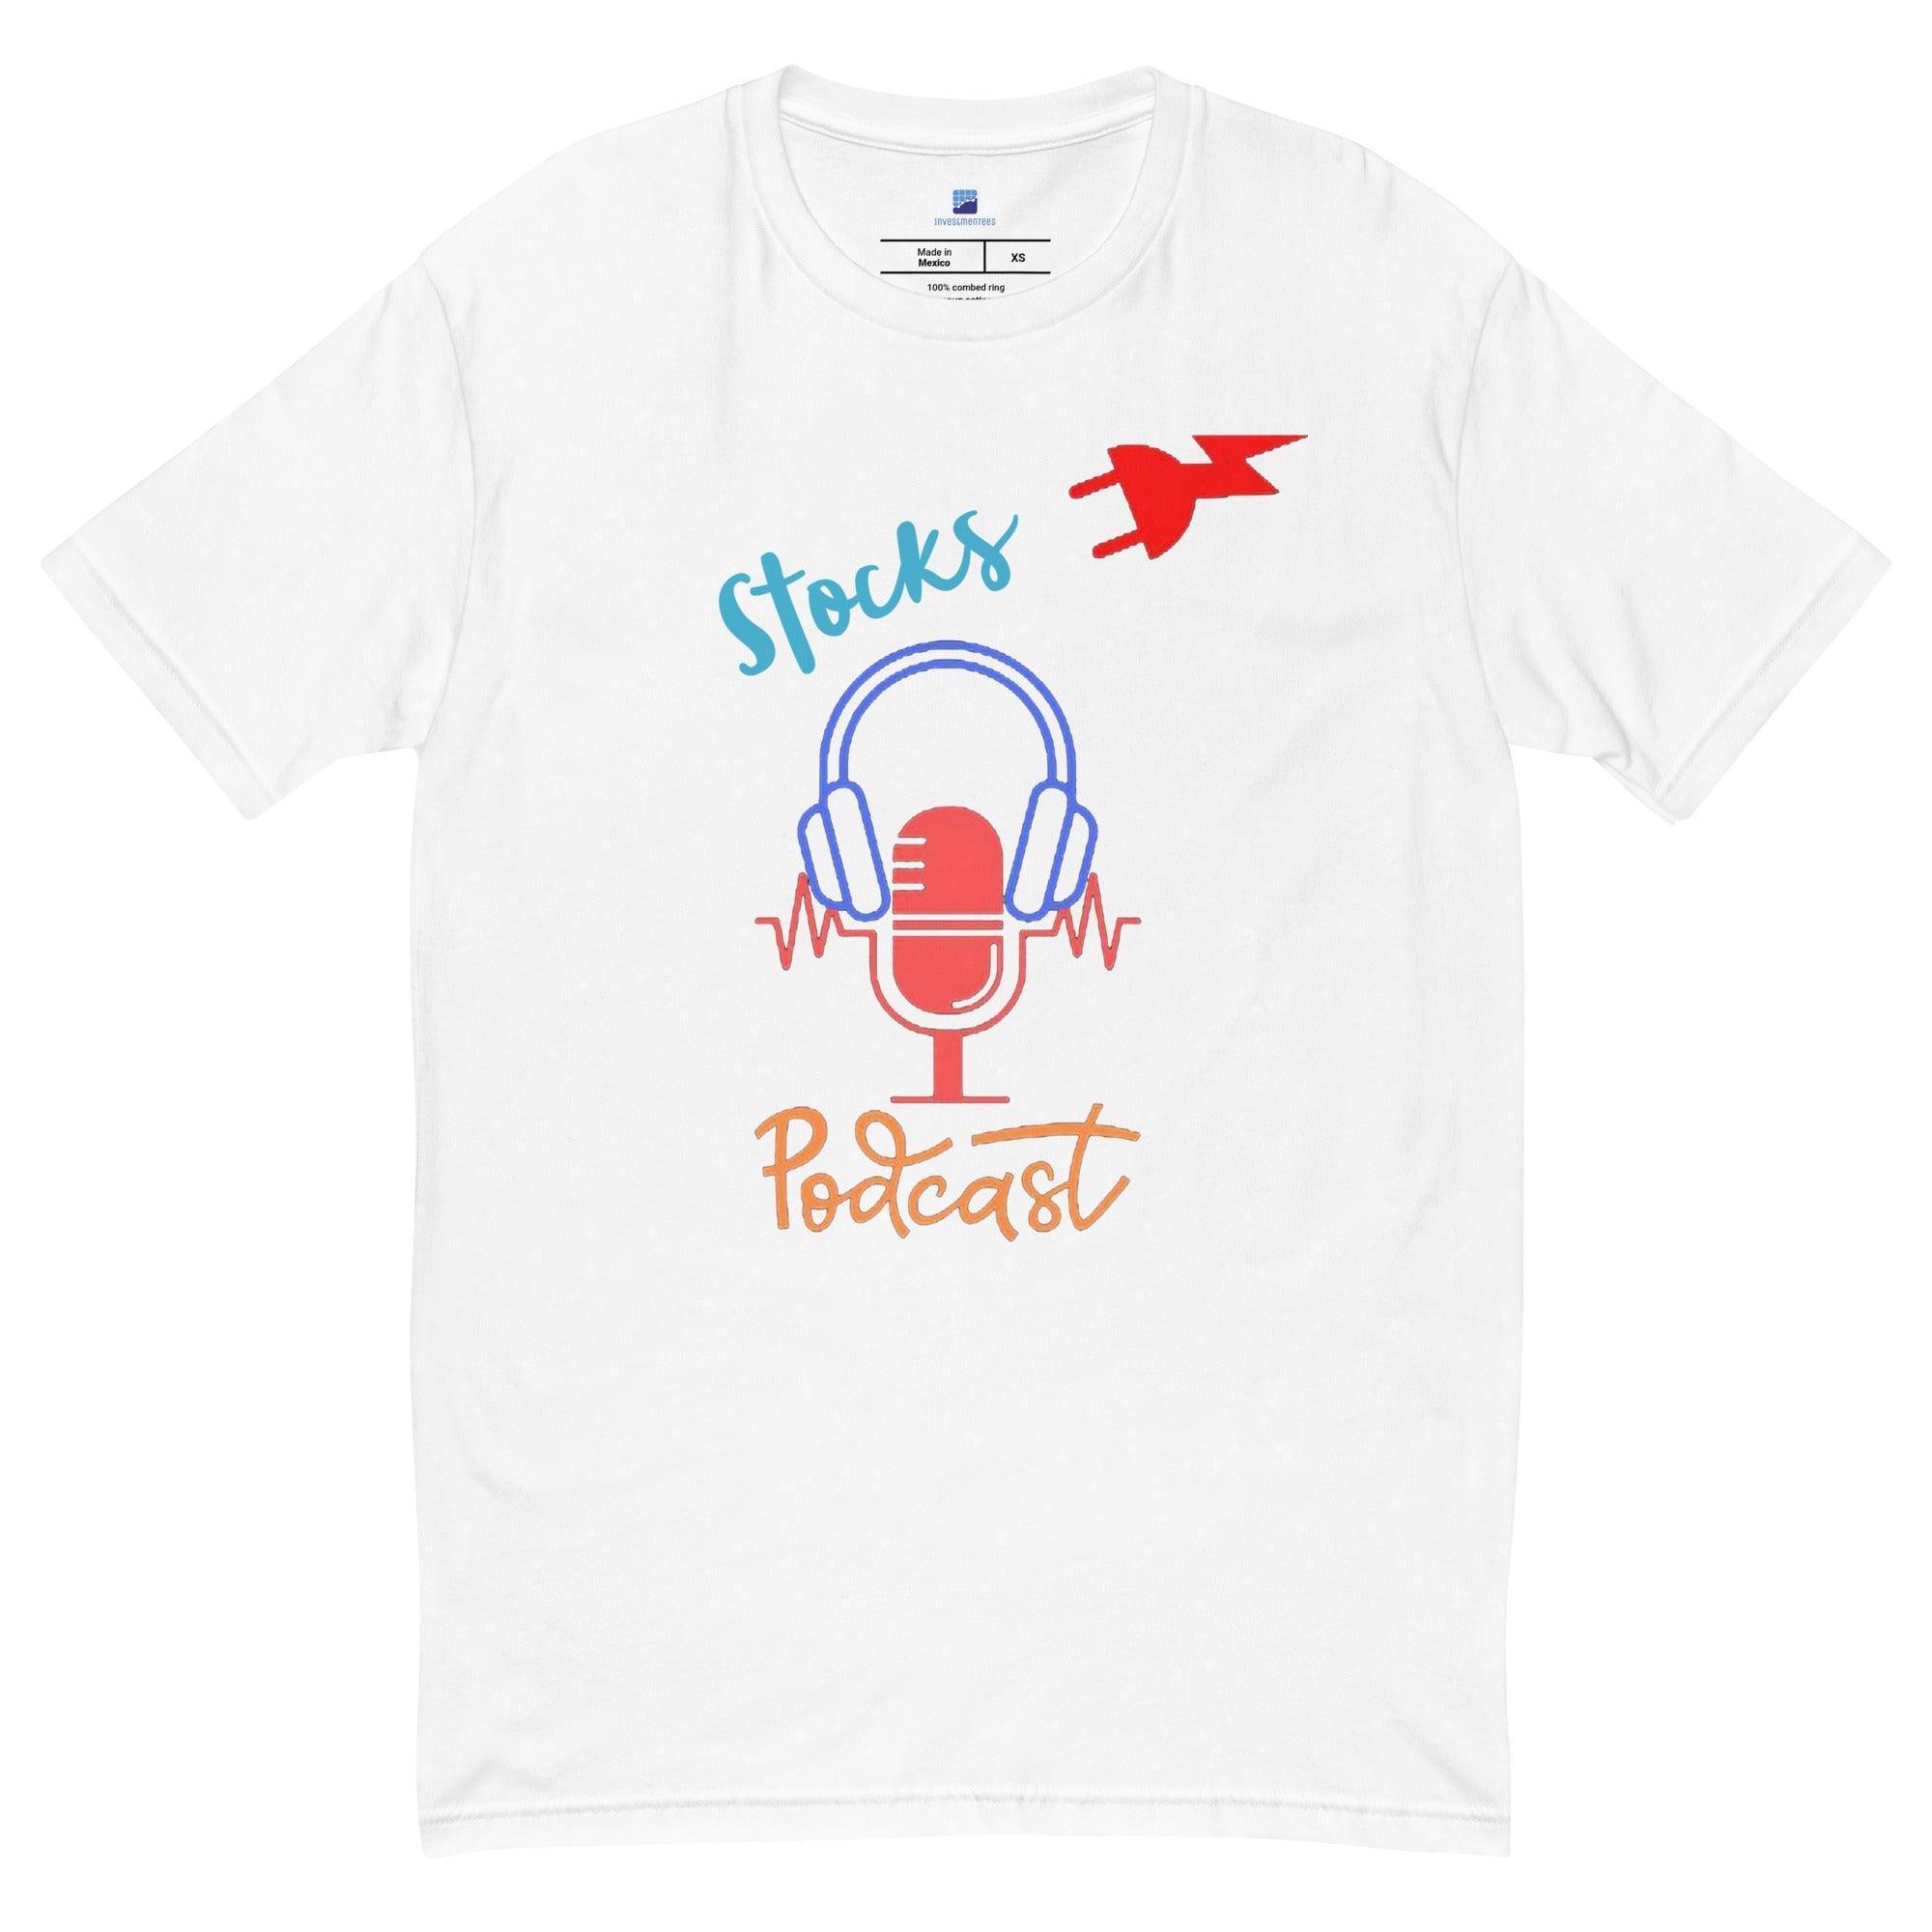 Stocks Podcast T-Shirt - InvestmenTees